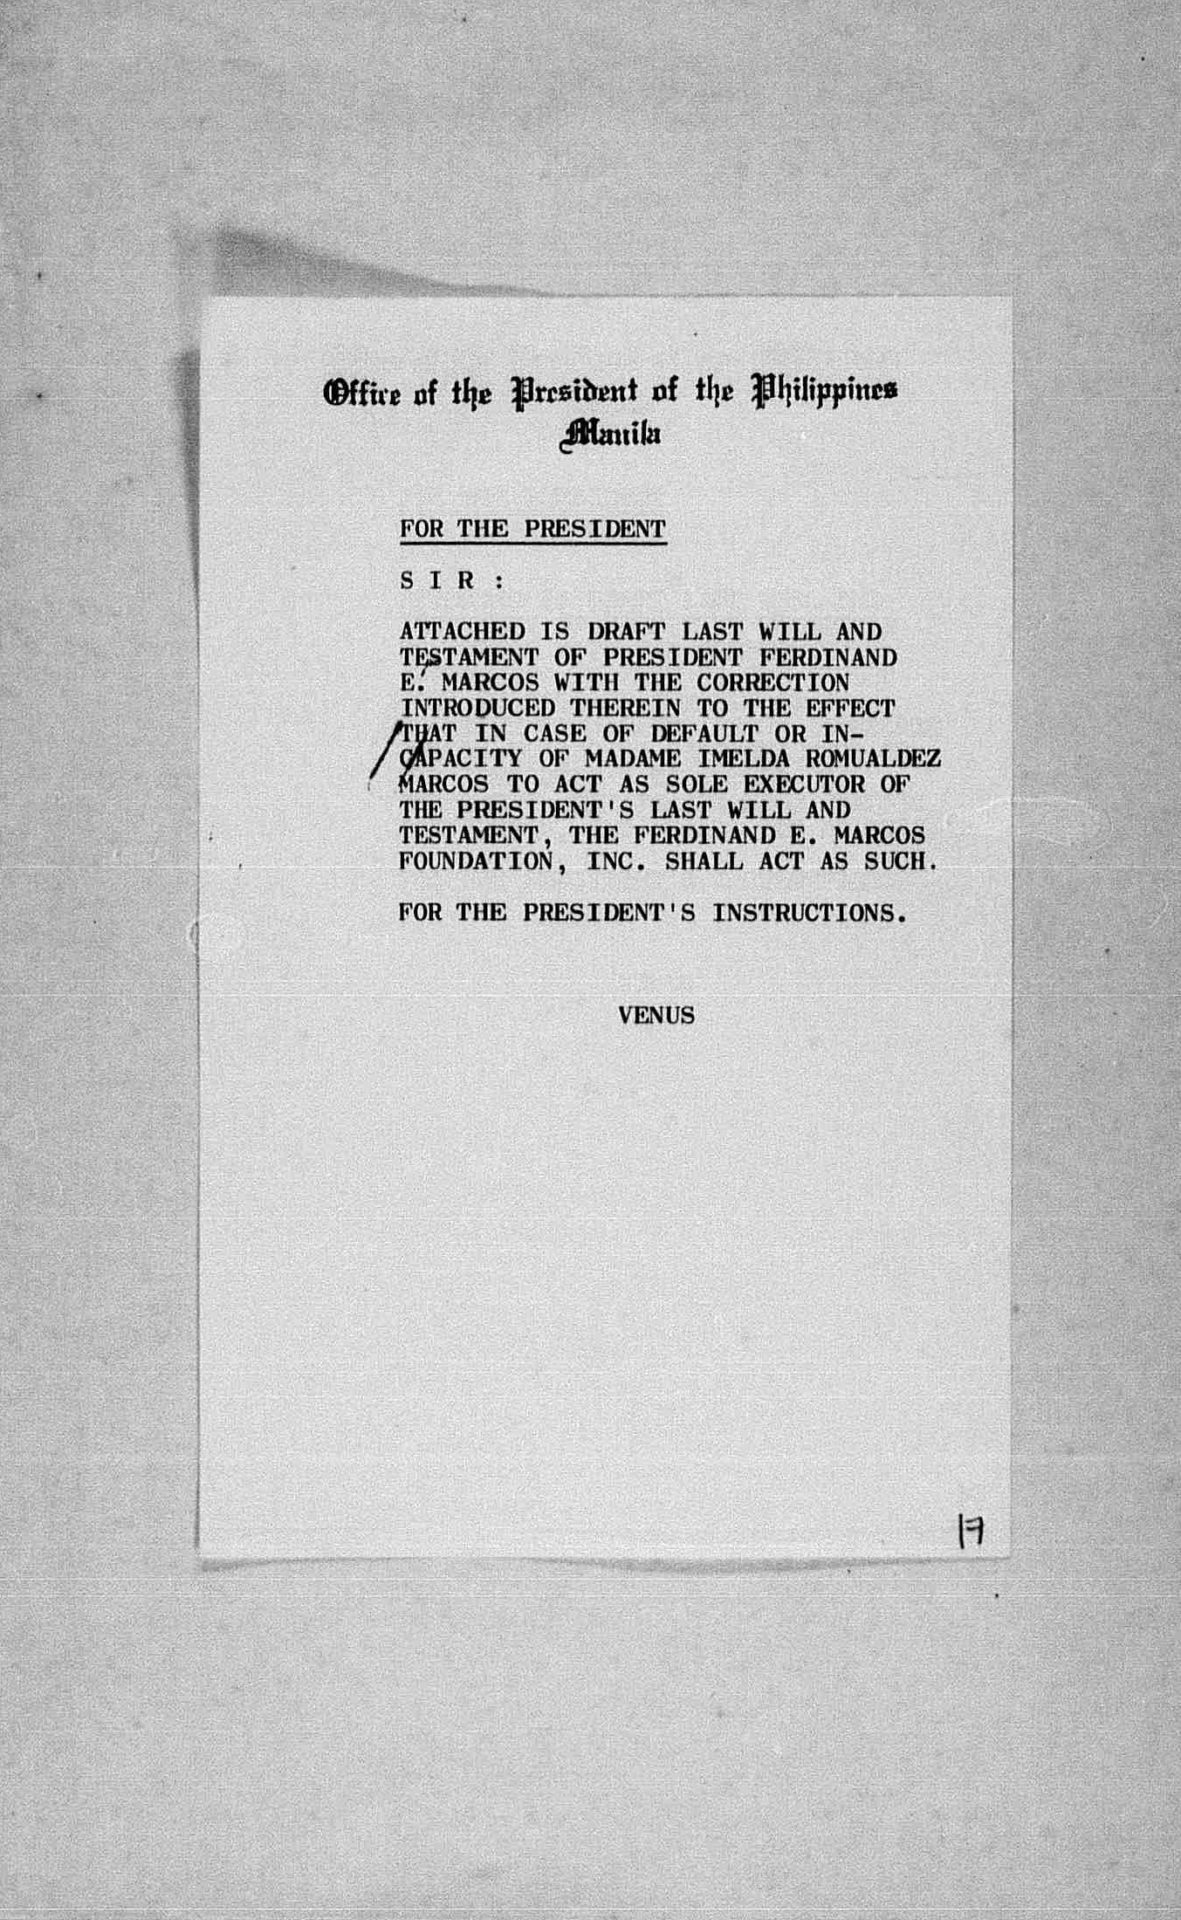 Note from Joaquin T. Venus, deputy presidential executive assistant of Ferdinand Marcos Sr., regarding a 1980 draft of his will, from the digitized files of the Presidential Commission on Good Government